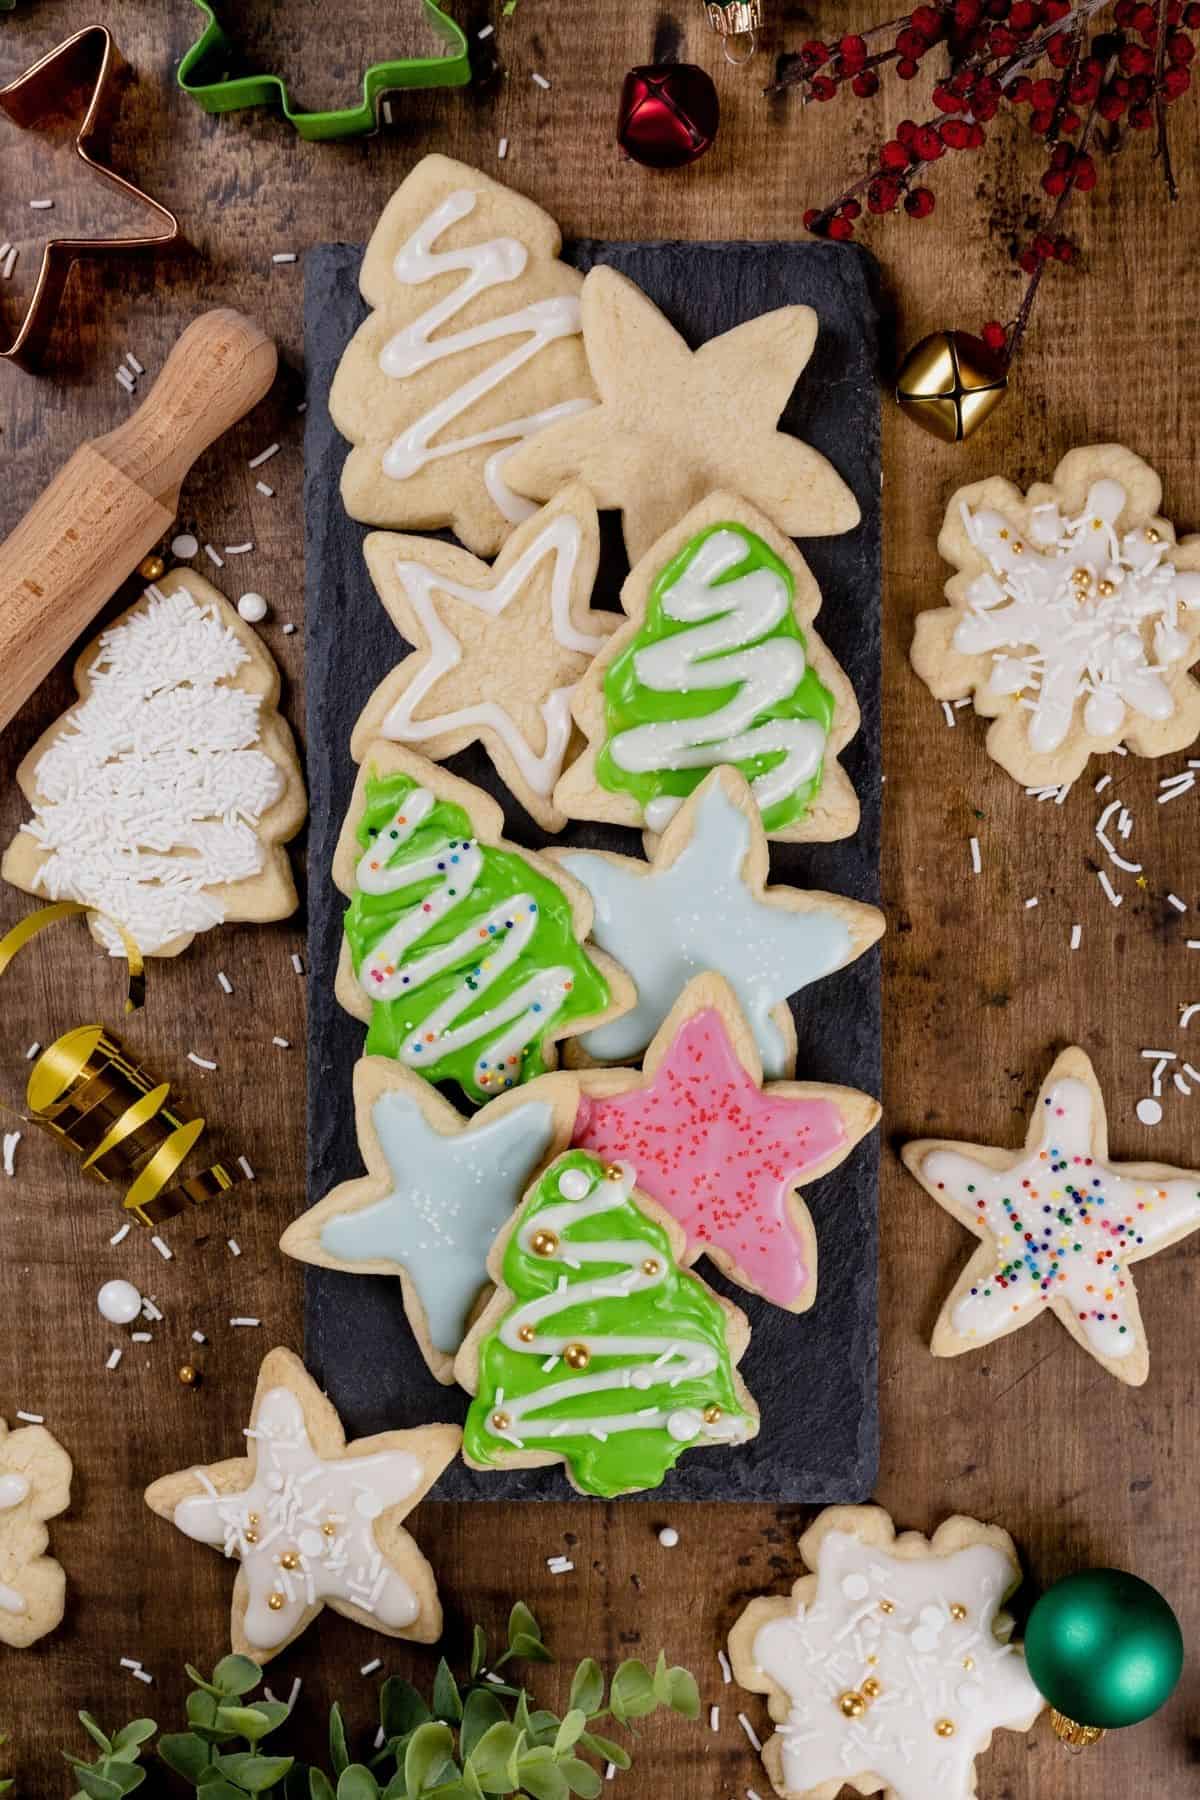 black plate filled with Christmas sugar cookies in various shapes like trees and stars. some are covered in icing and sprinkles and some are plain. more cookies, sprinkles, ribbons, and various holiday themed items surround the plate making for a very full picture.